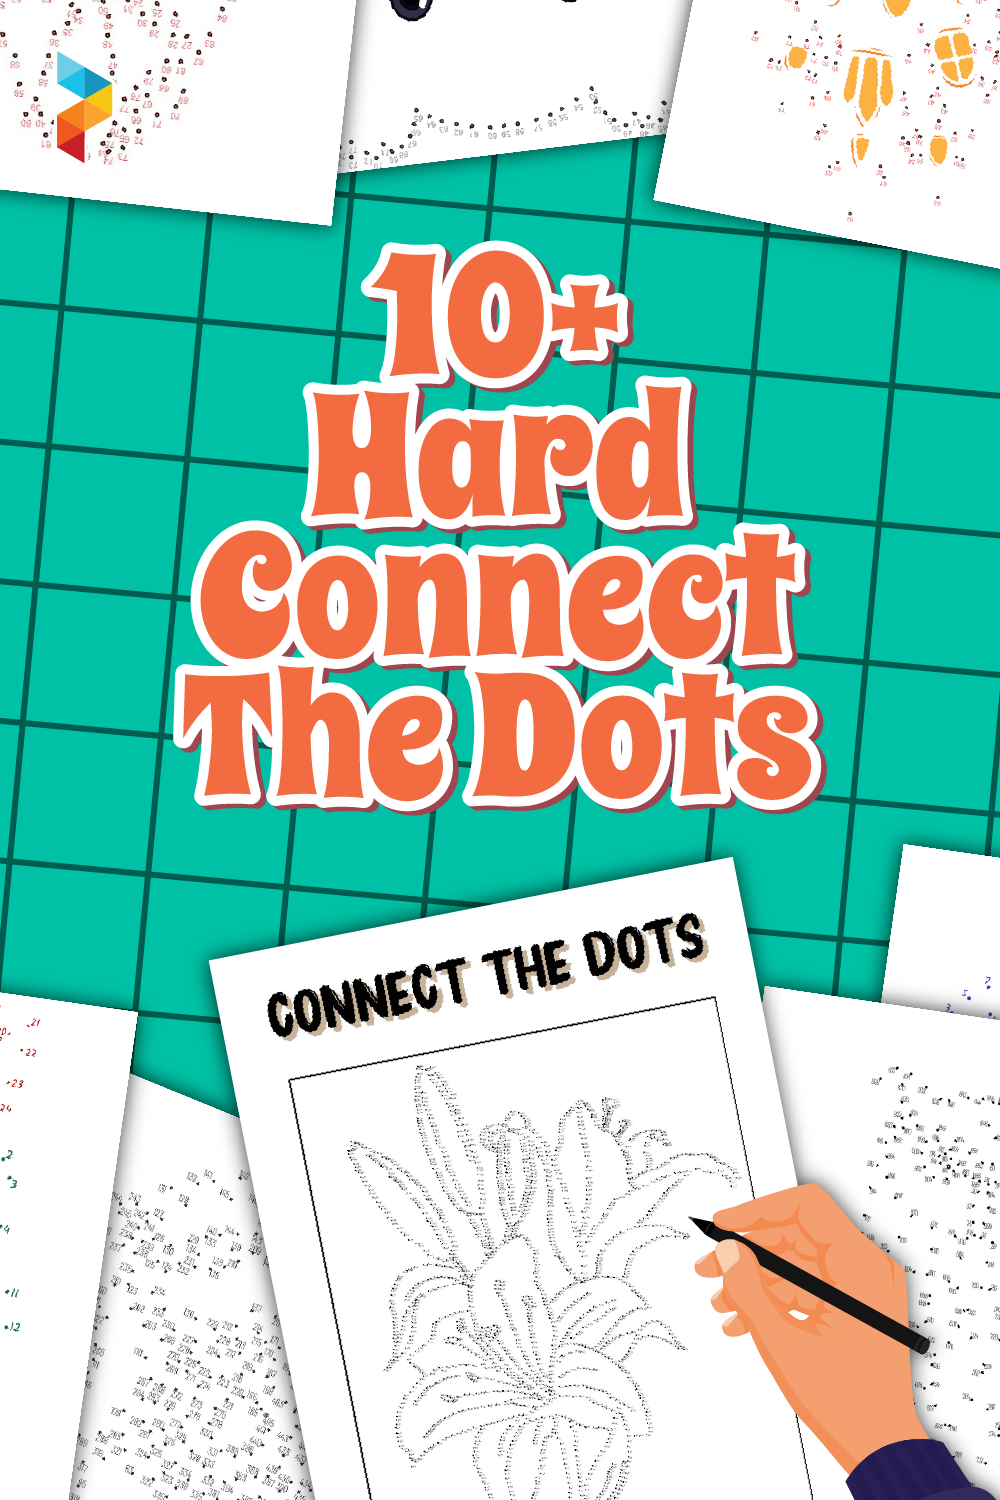 Hard Connect The Dots